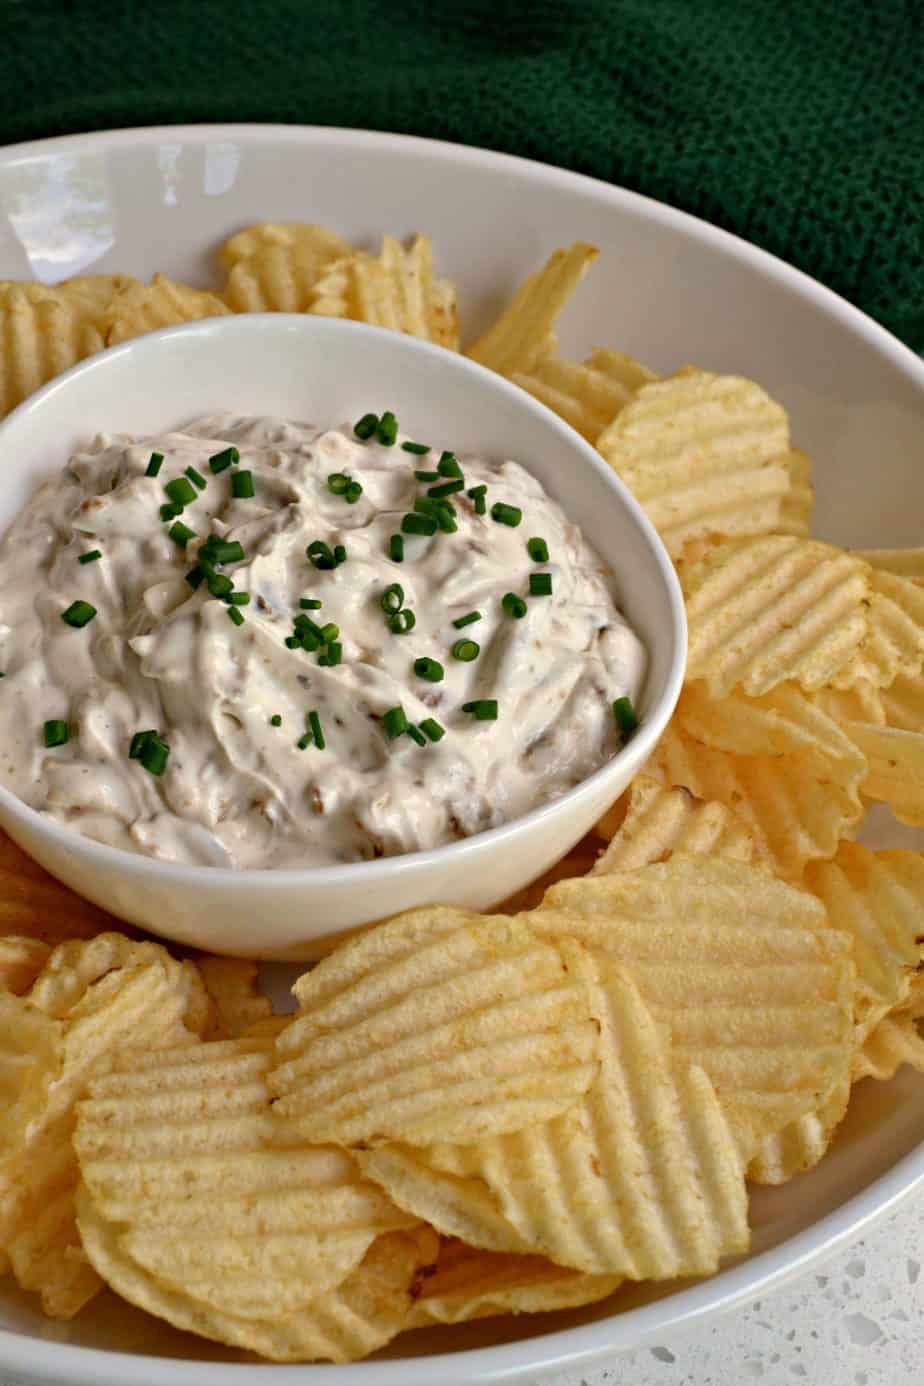 This homemade french onion dip is better than store-bought and packed with fresh flavor